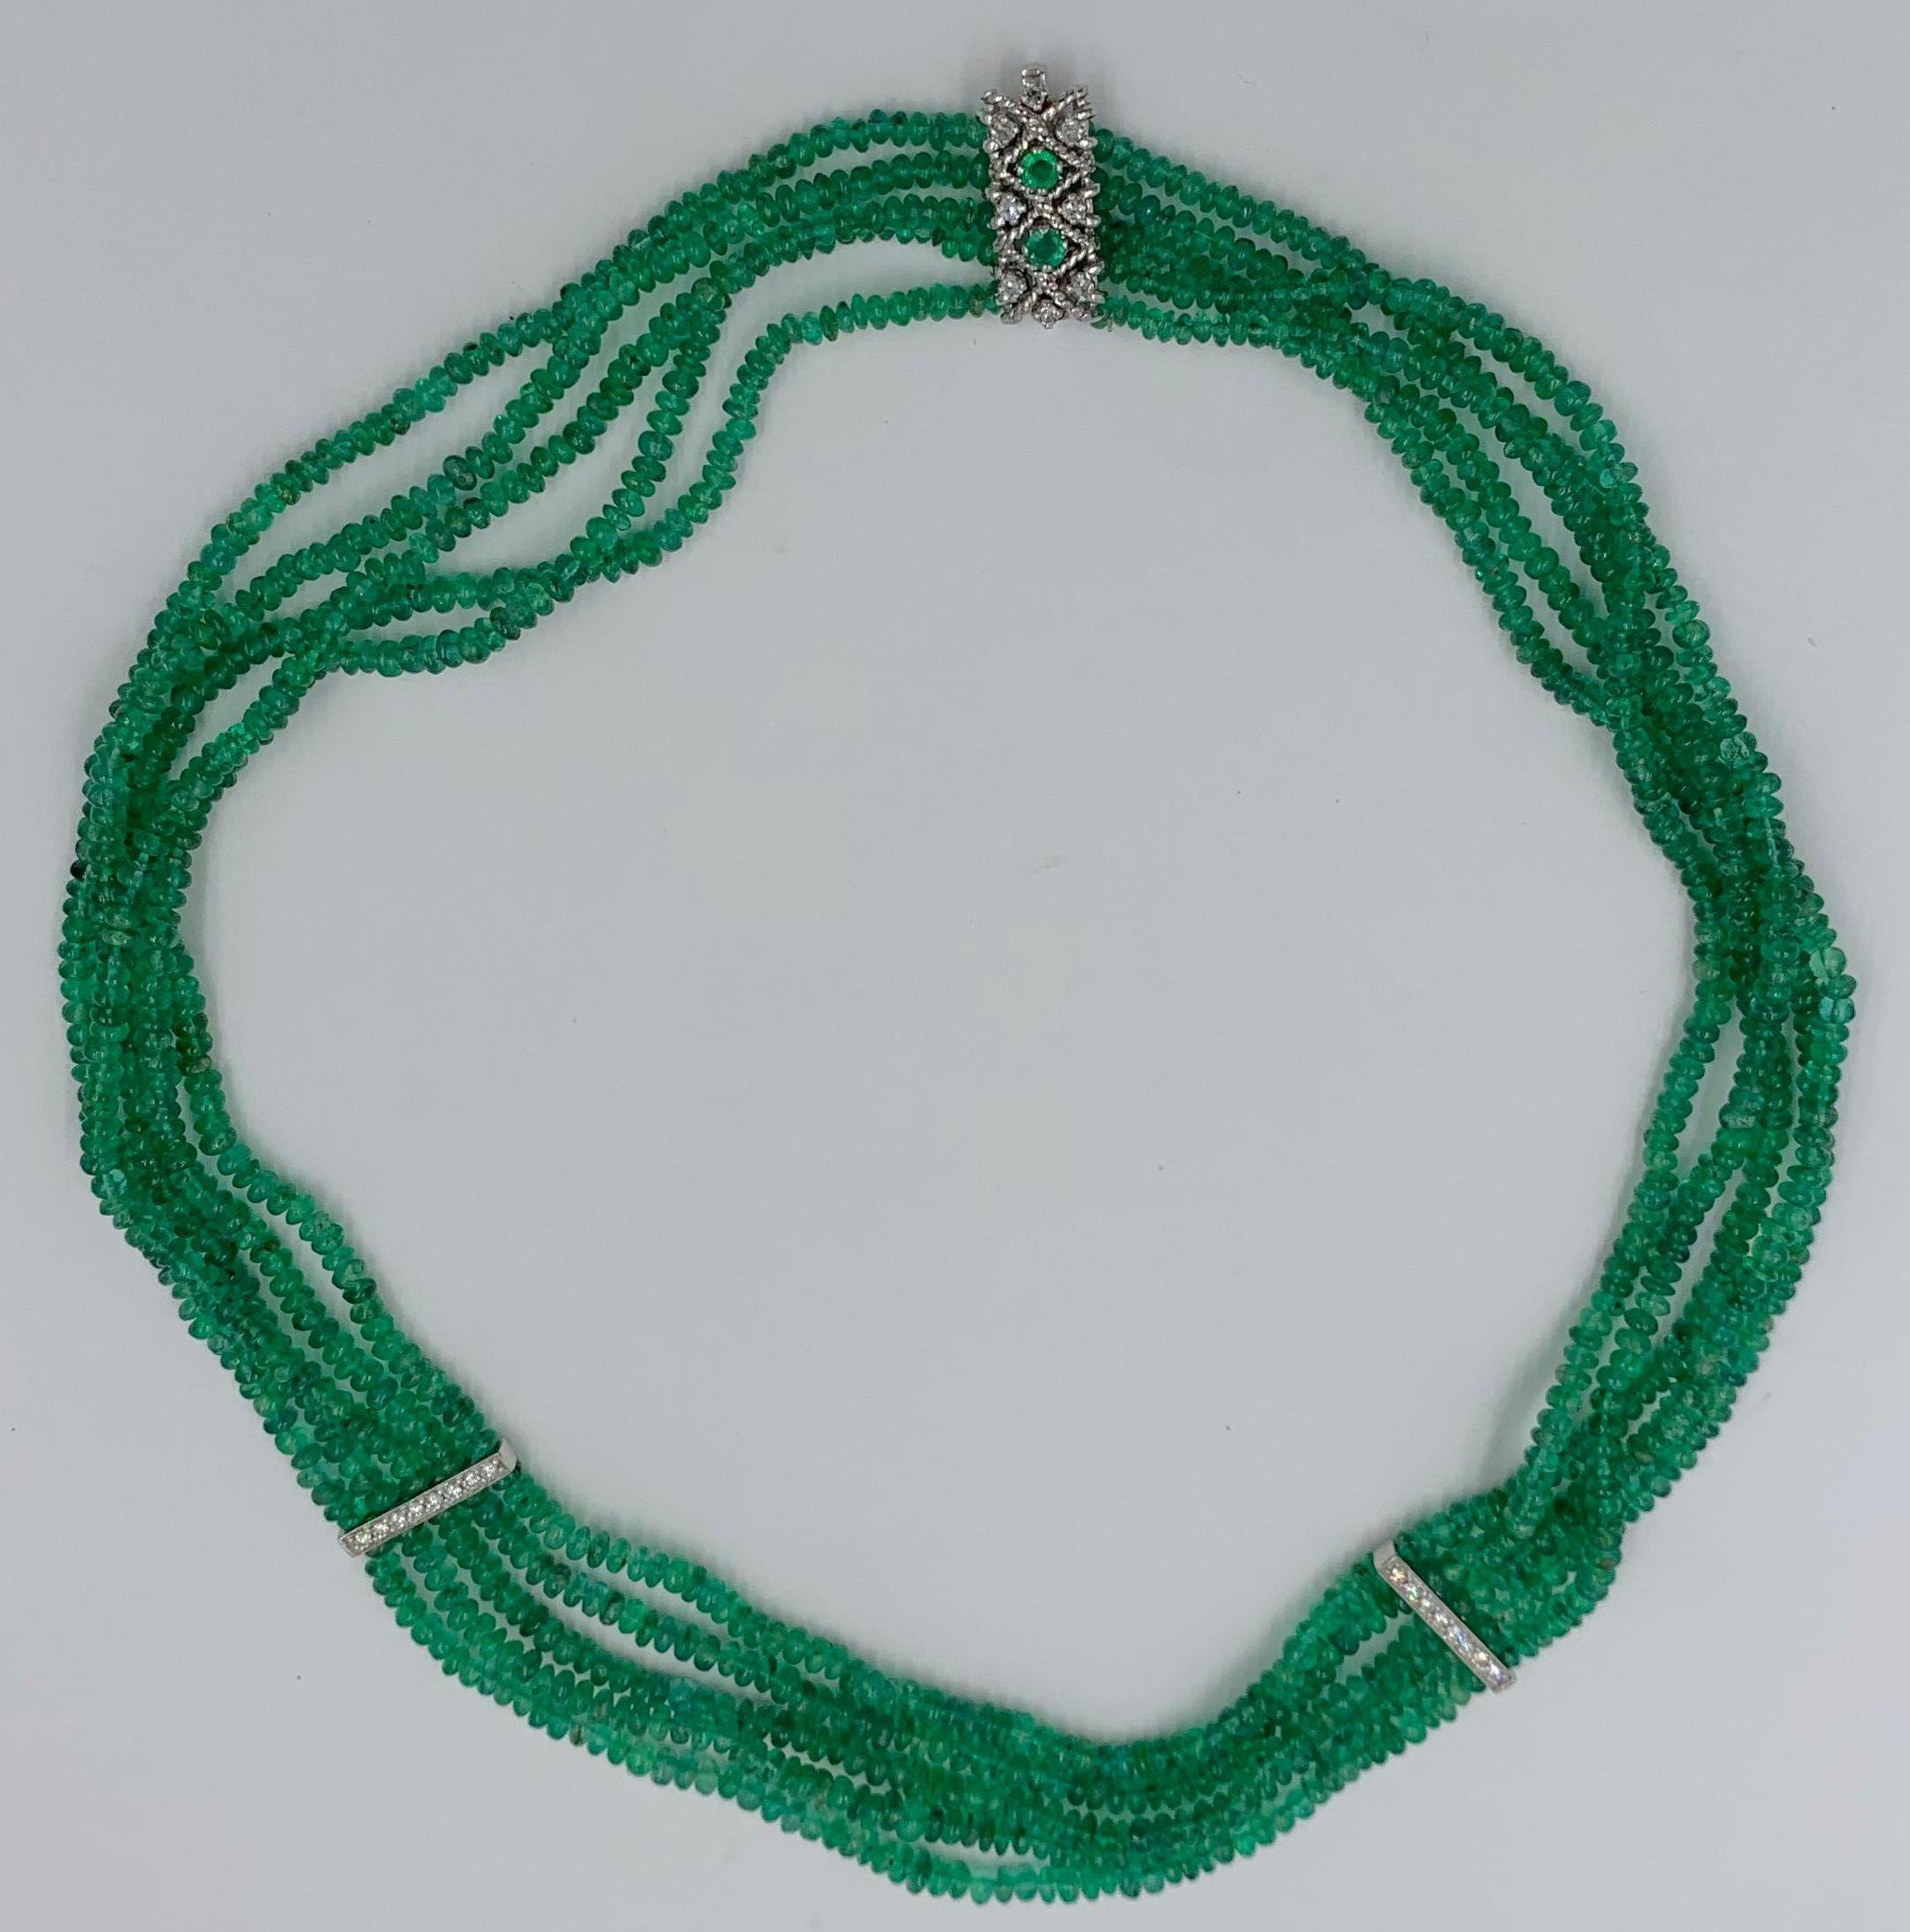 This is a radiant Emerald Diamond Necklace with Five Strands of Sparkling Natural Mined Emerald Beads with two stations of Diamonds joined by a roped Diamond and Emerald clasp in 14 Karat White Gold. The Emerald Necklace is 16.5 inches (42 cm) long.